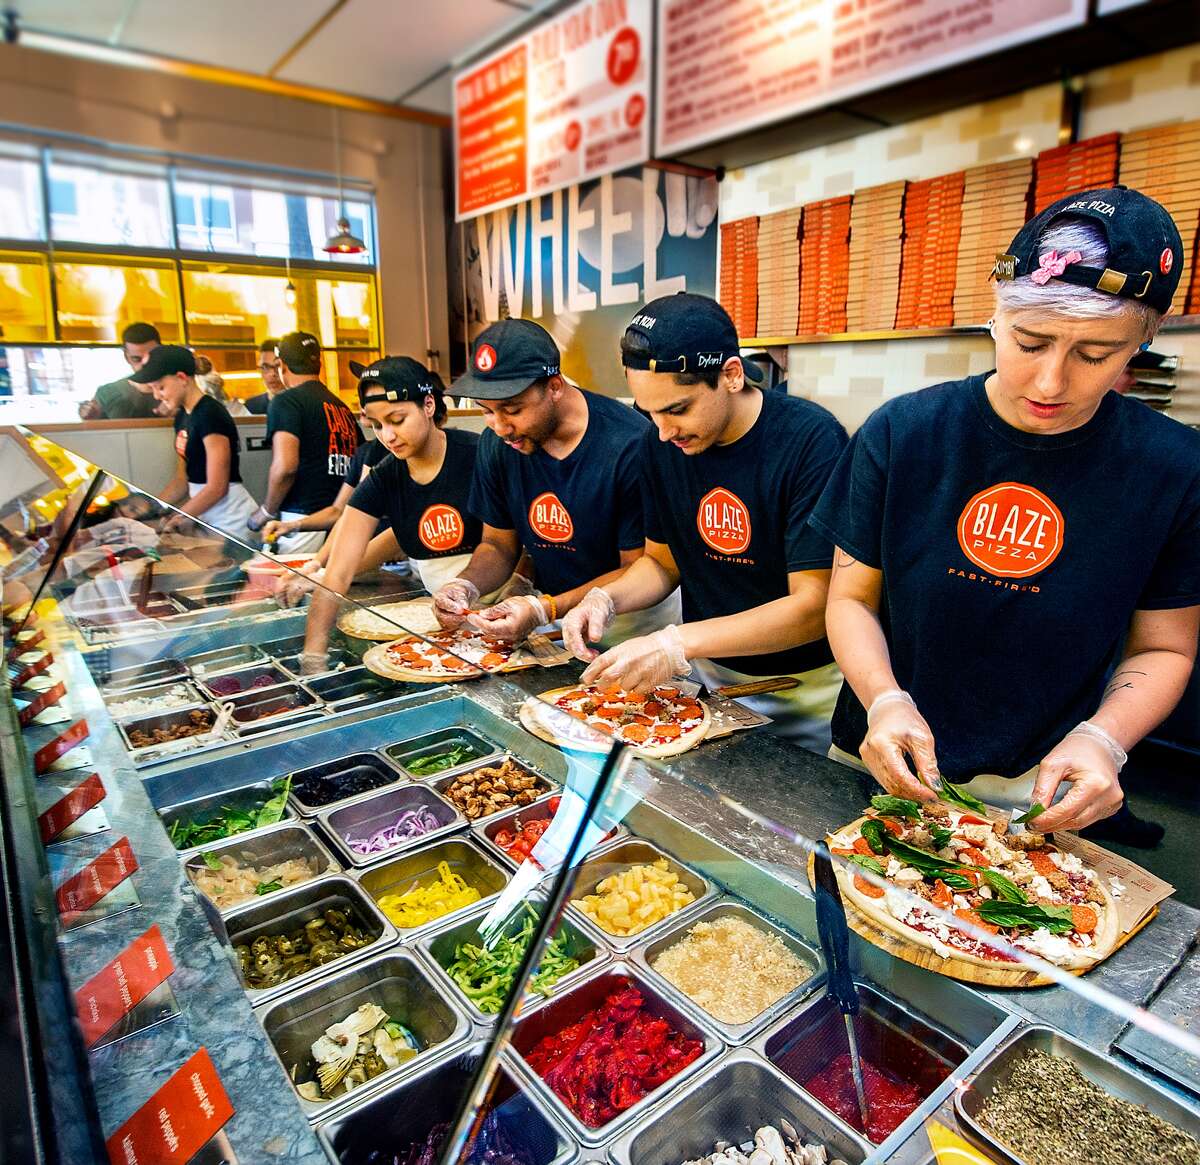 Blaze Pizza has a service model similar to Chipotle. The chain is now located in more than 30 states and is backed by a number of celebrities, including Maria Shriver. Photo via Blaze Pizza.